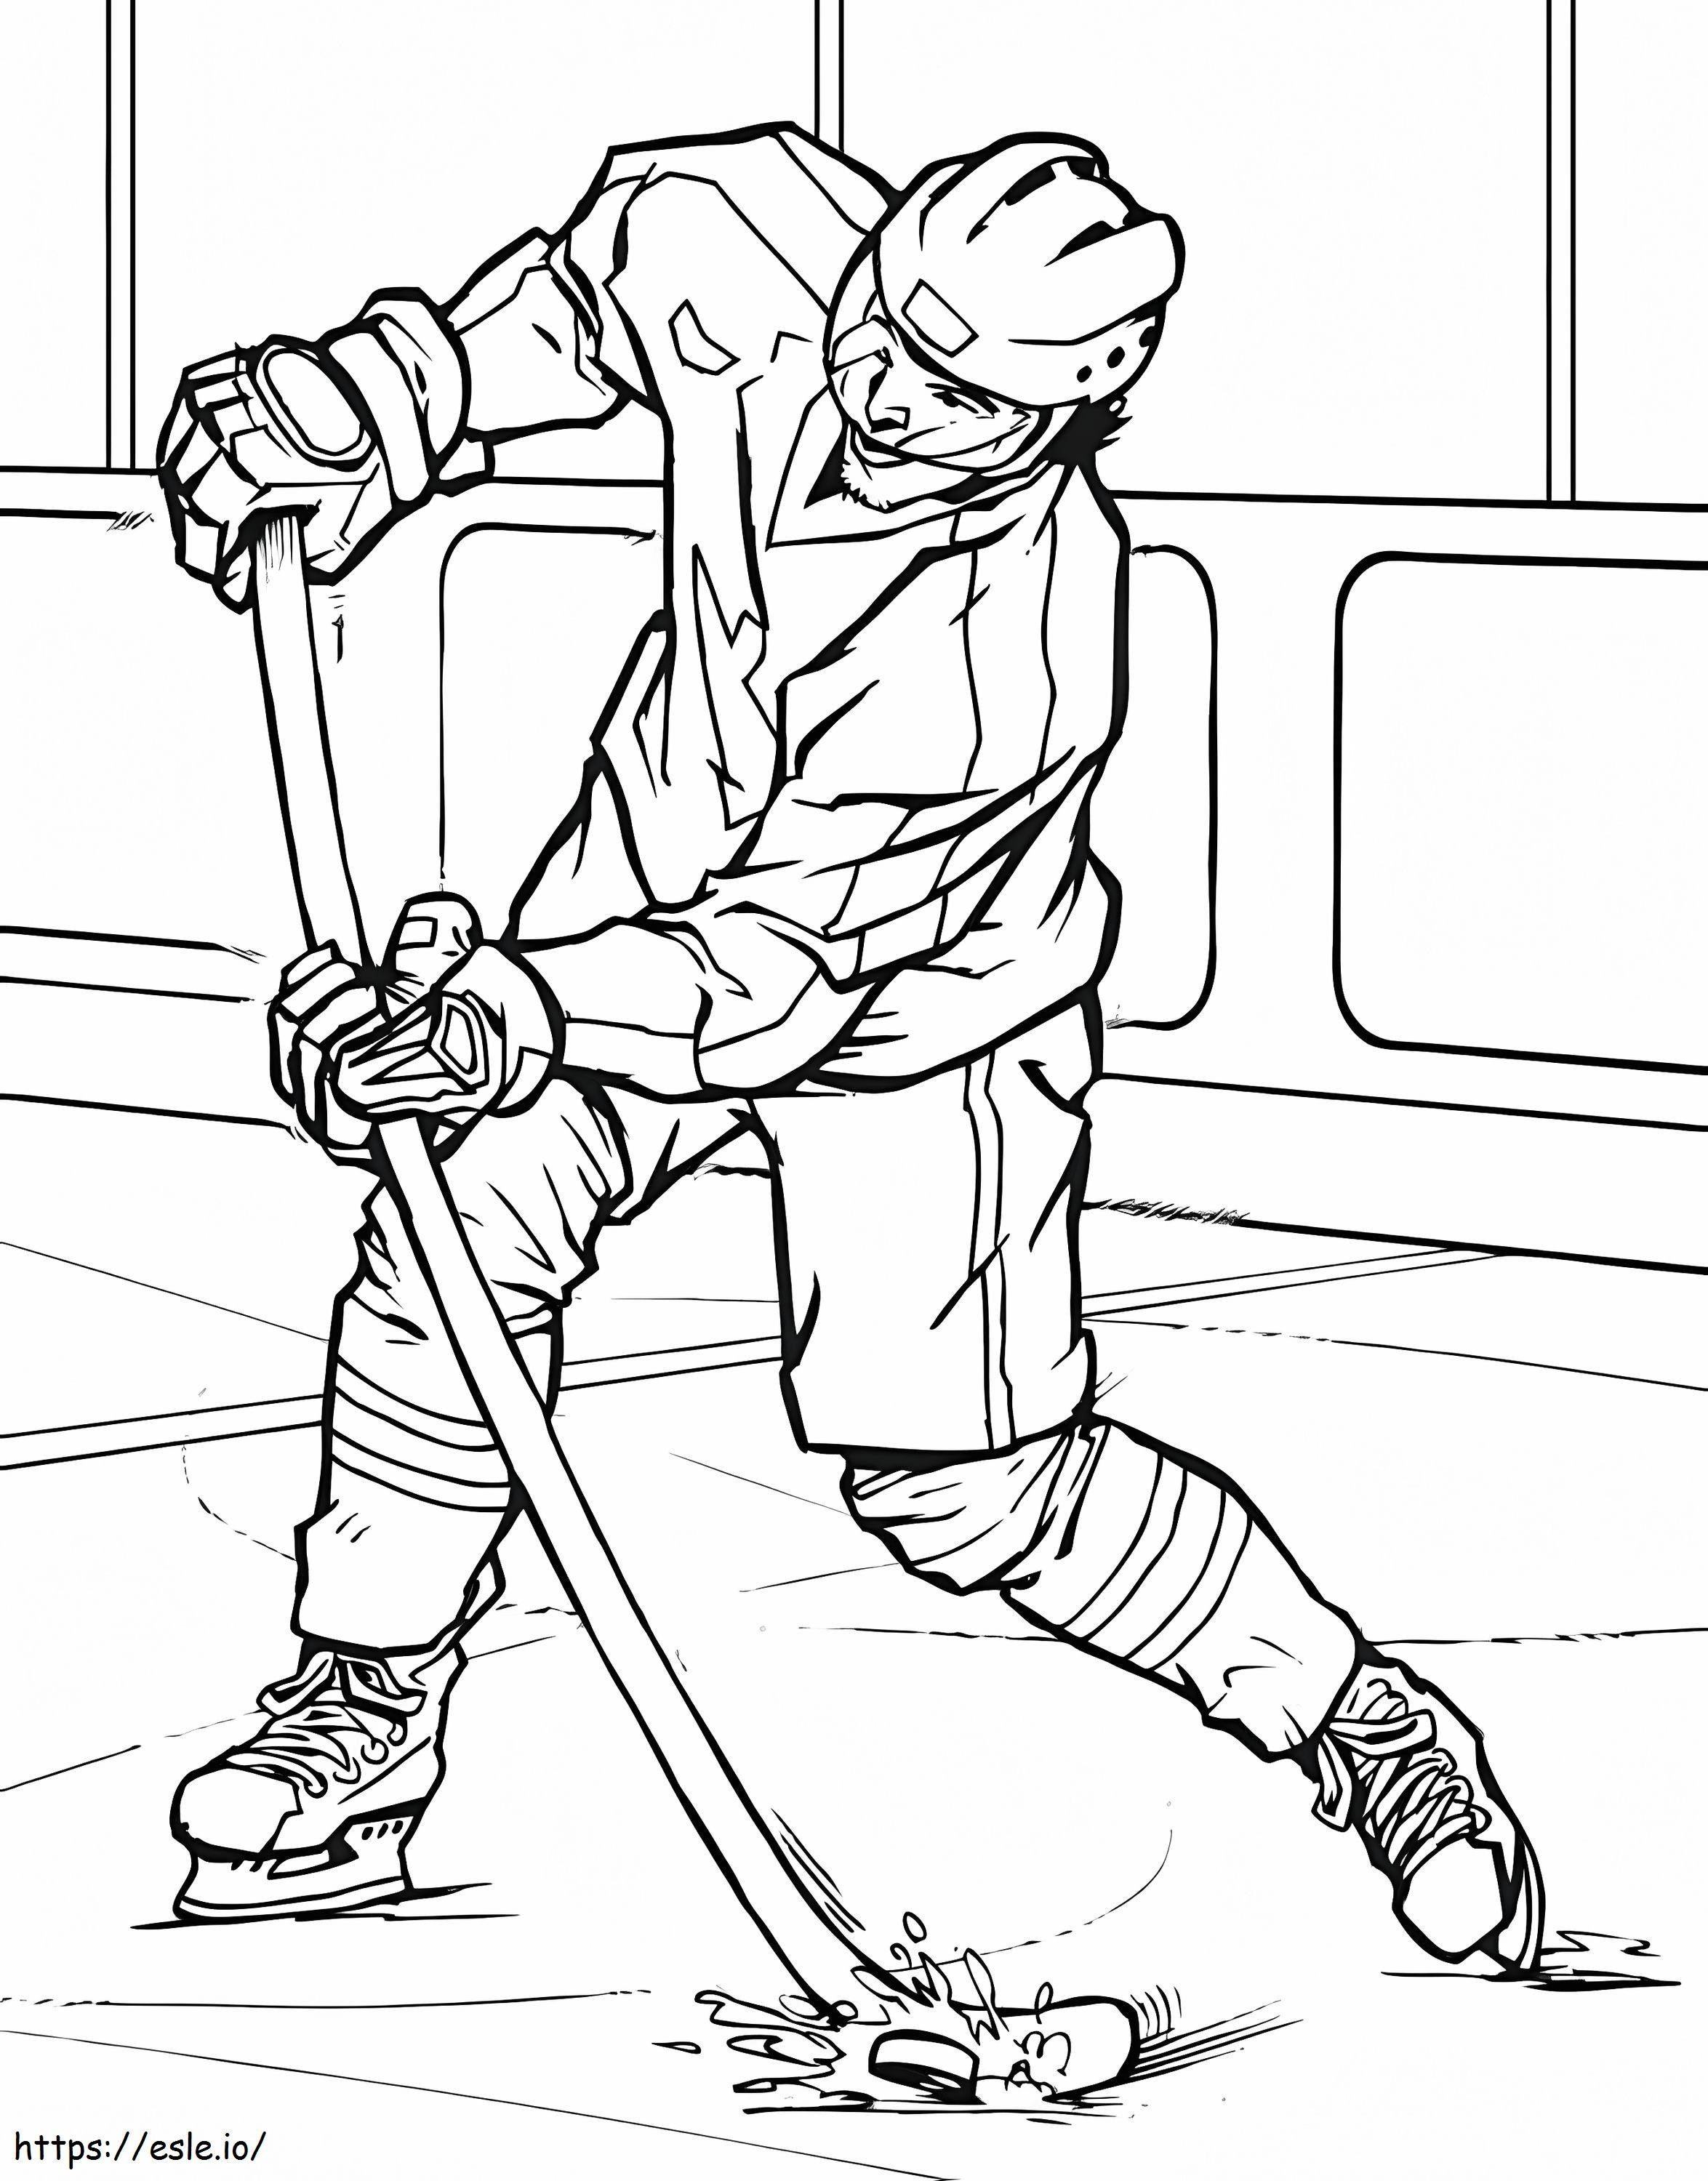 Regular Hockey Player coloring page